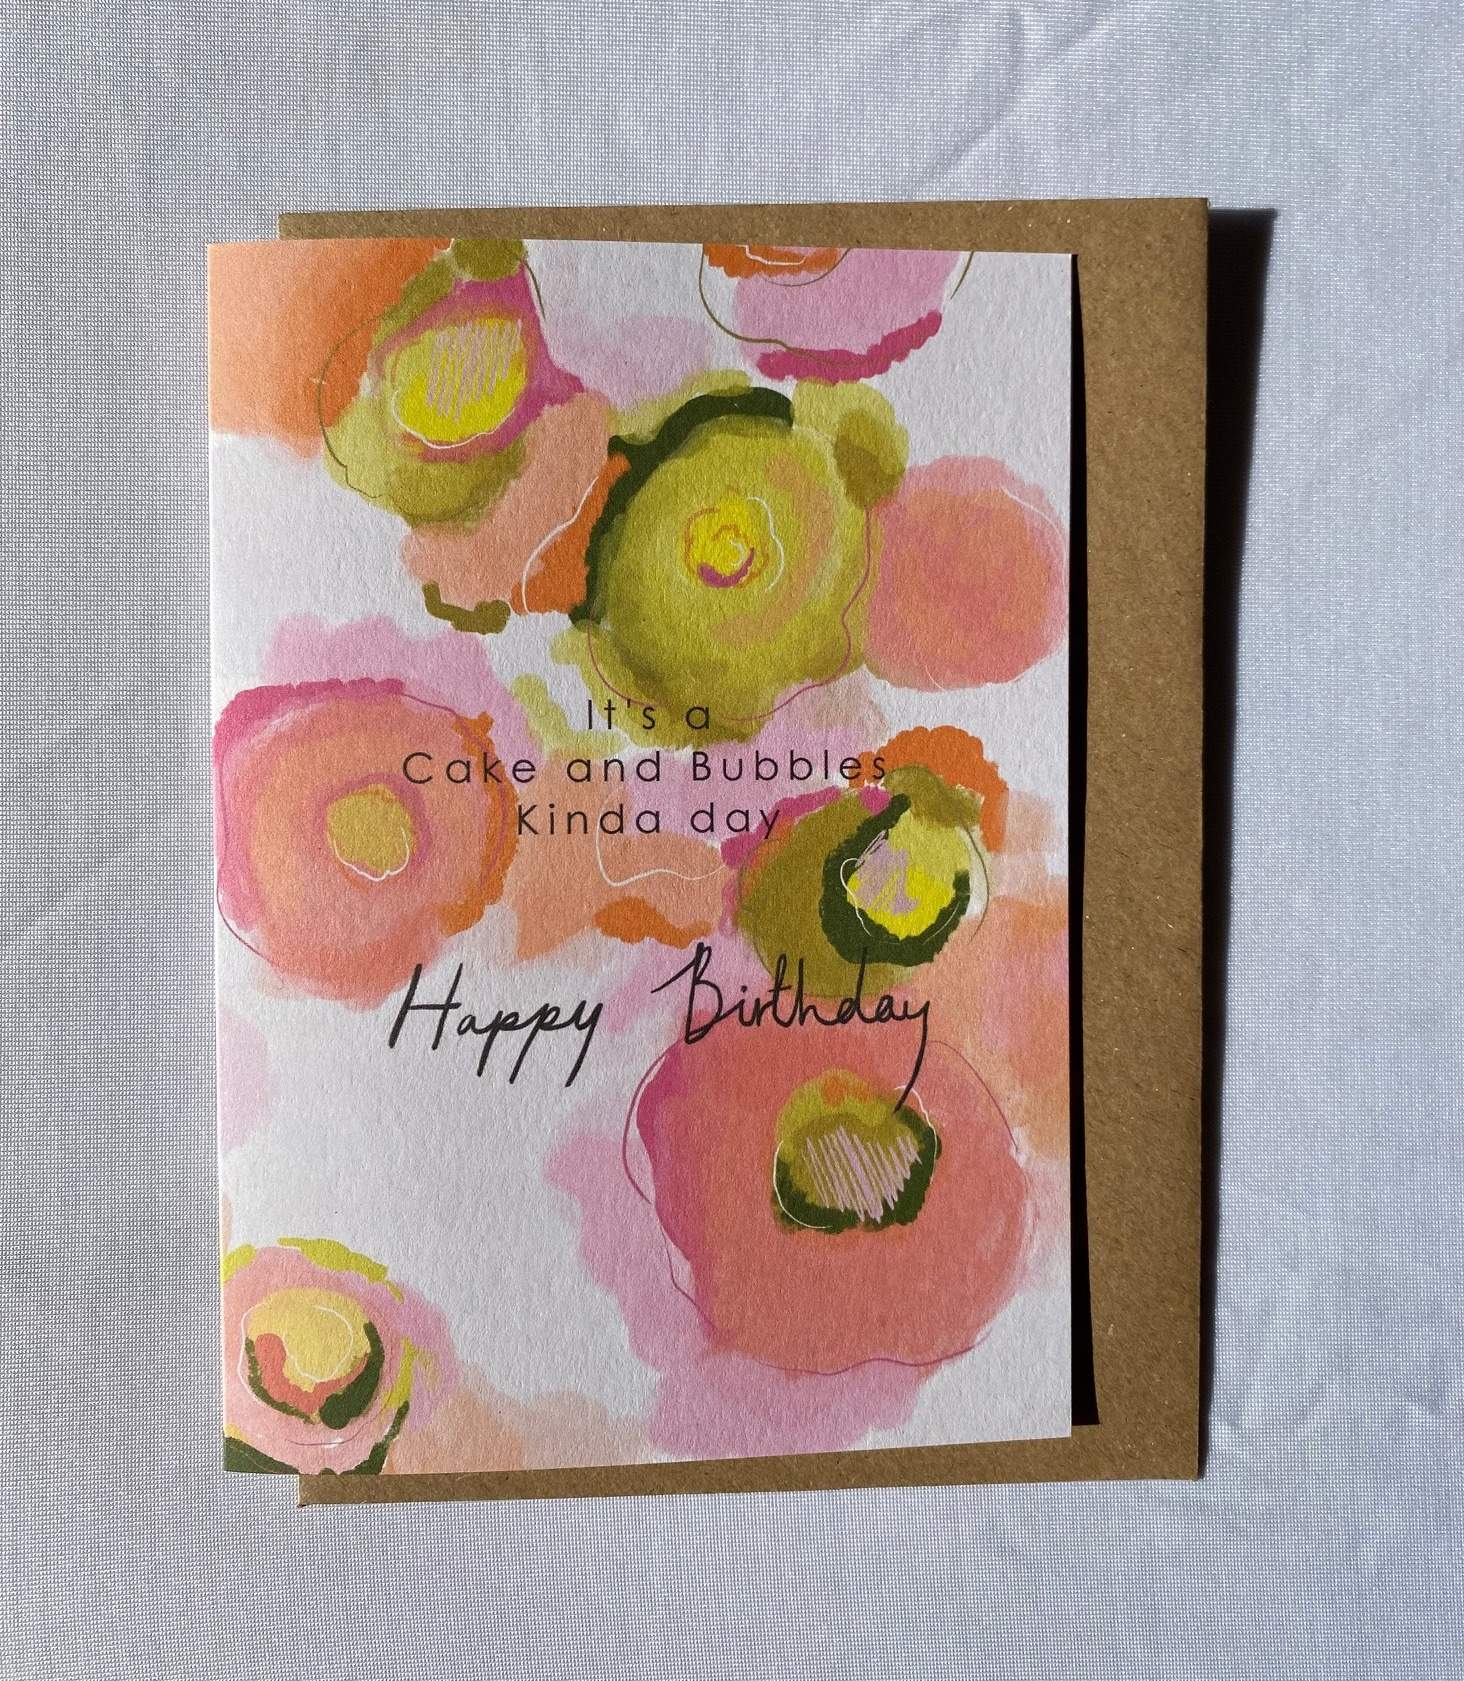 Cake and Bubbles Birthday card LM047